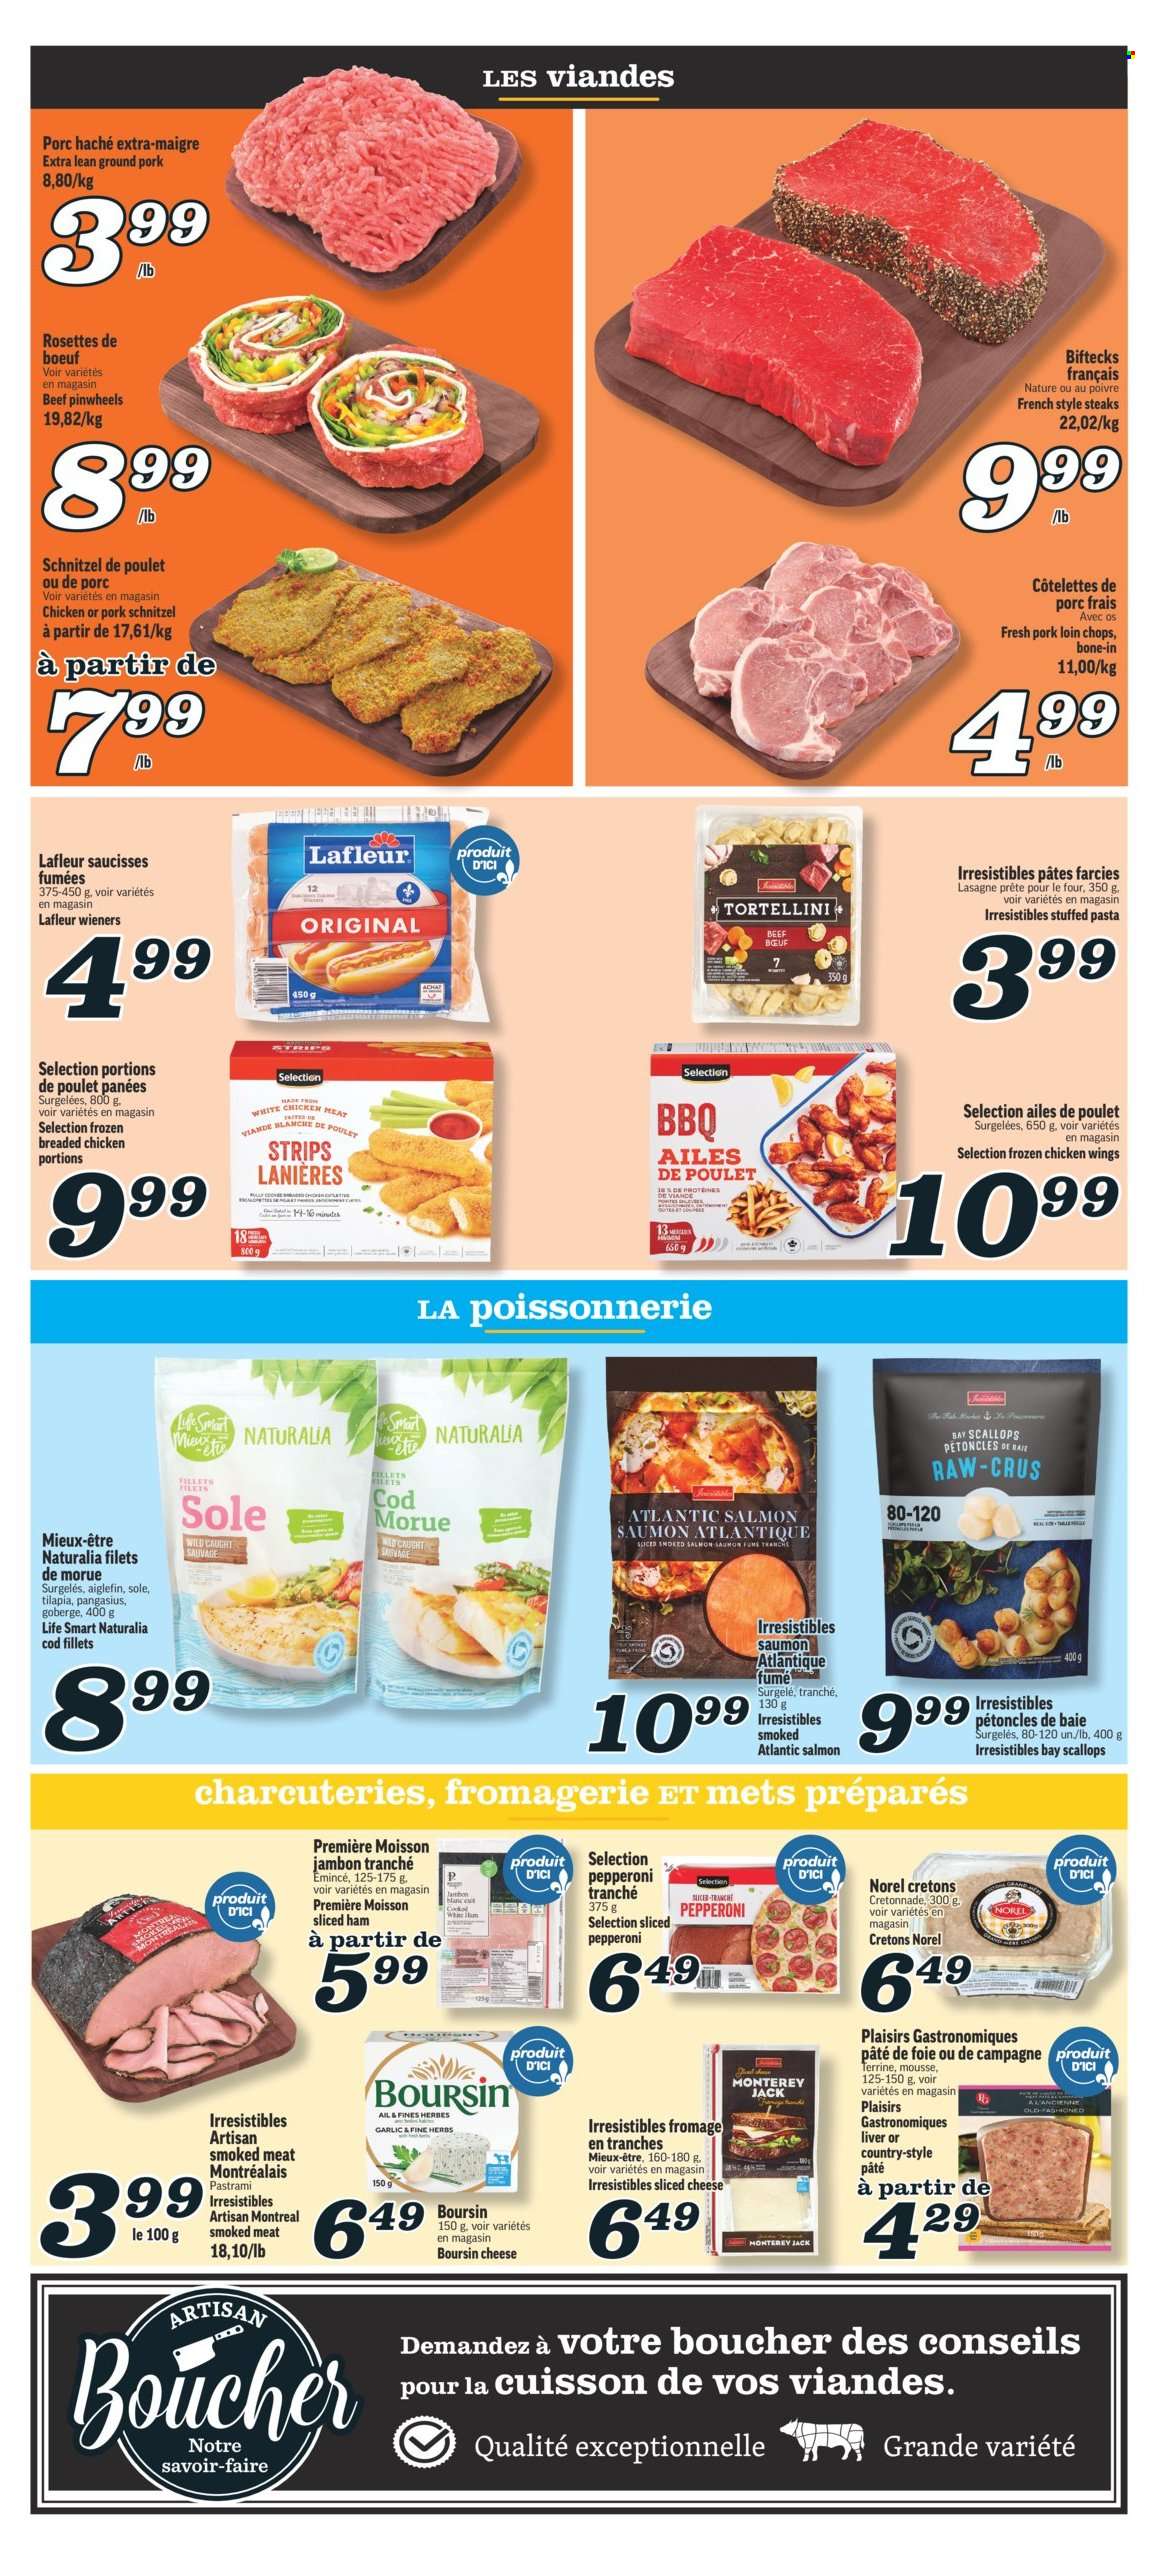 thumbnail - Marché Richelieu Flyer - July 04, 2024 - July 10, 2024 - Sales products - cod, fish fillets, salmon, scallops, smoked salmon, tilapia, whitefish, pangasius, seafood, pasta, tortellini, schnitzel, ready meal, breaded chicken, ham, pastrami, pepperoni, frankfurters, pâté, Monterey Jack cheese, sliced cheese, cheese, mousse, chicken wings, strips, steak, ground pork, pork chops, pork loin, pork meat. Page 3.